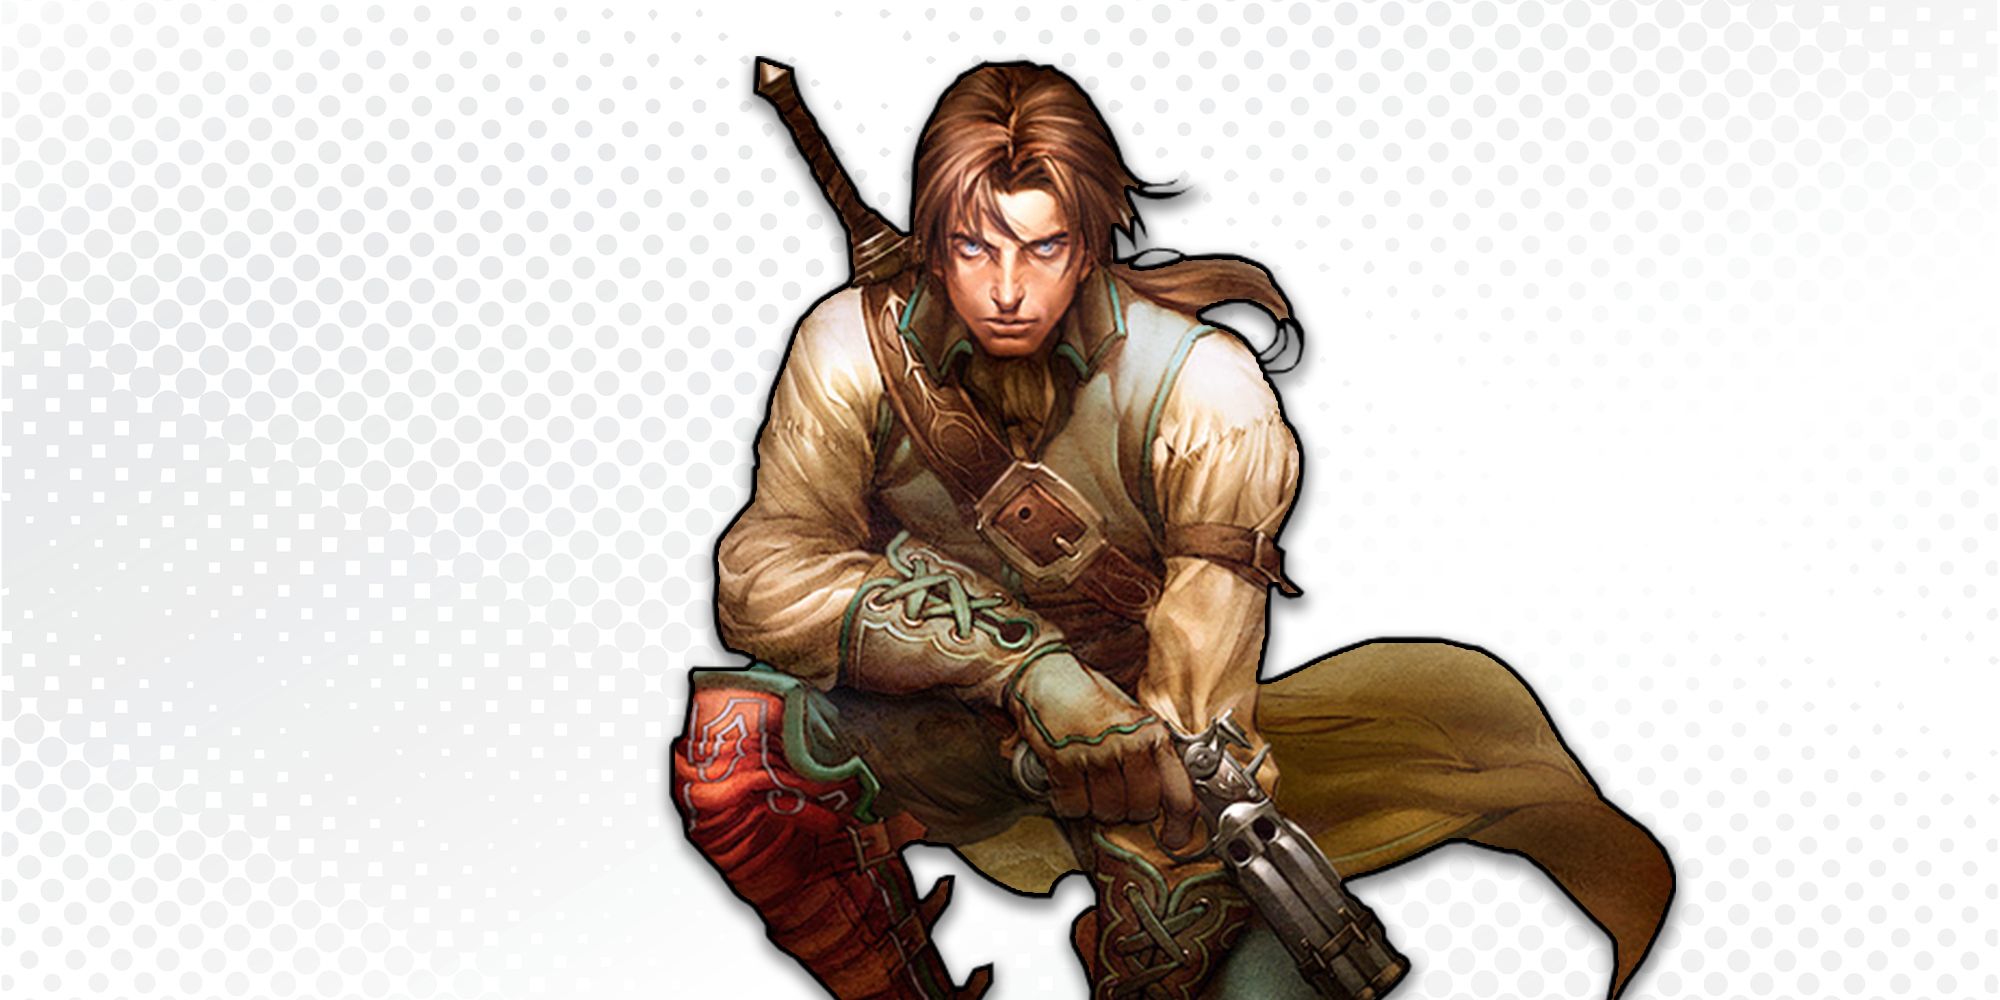 The male protagonist from Fable 2 kneels down while whielding a old fashioned pistol. There's also a sword on his back. He is in front of a while background. 